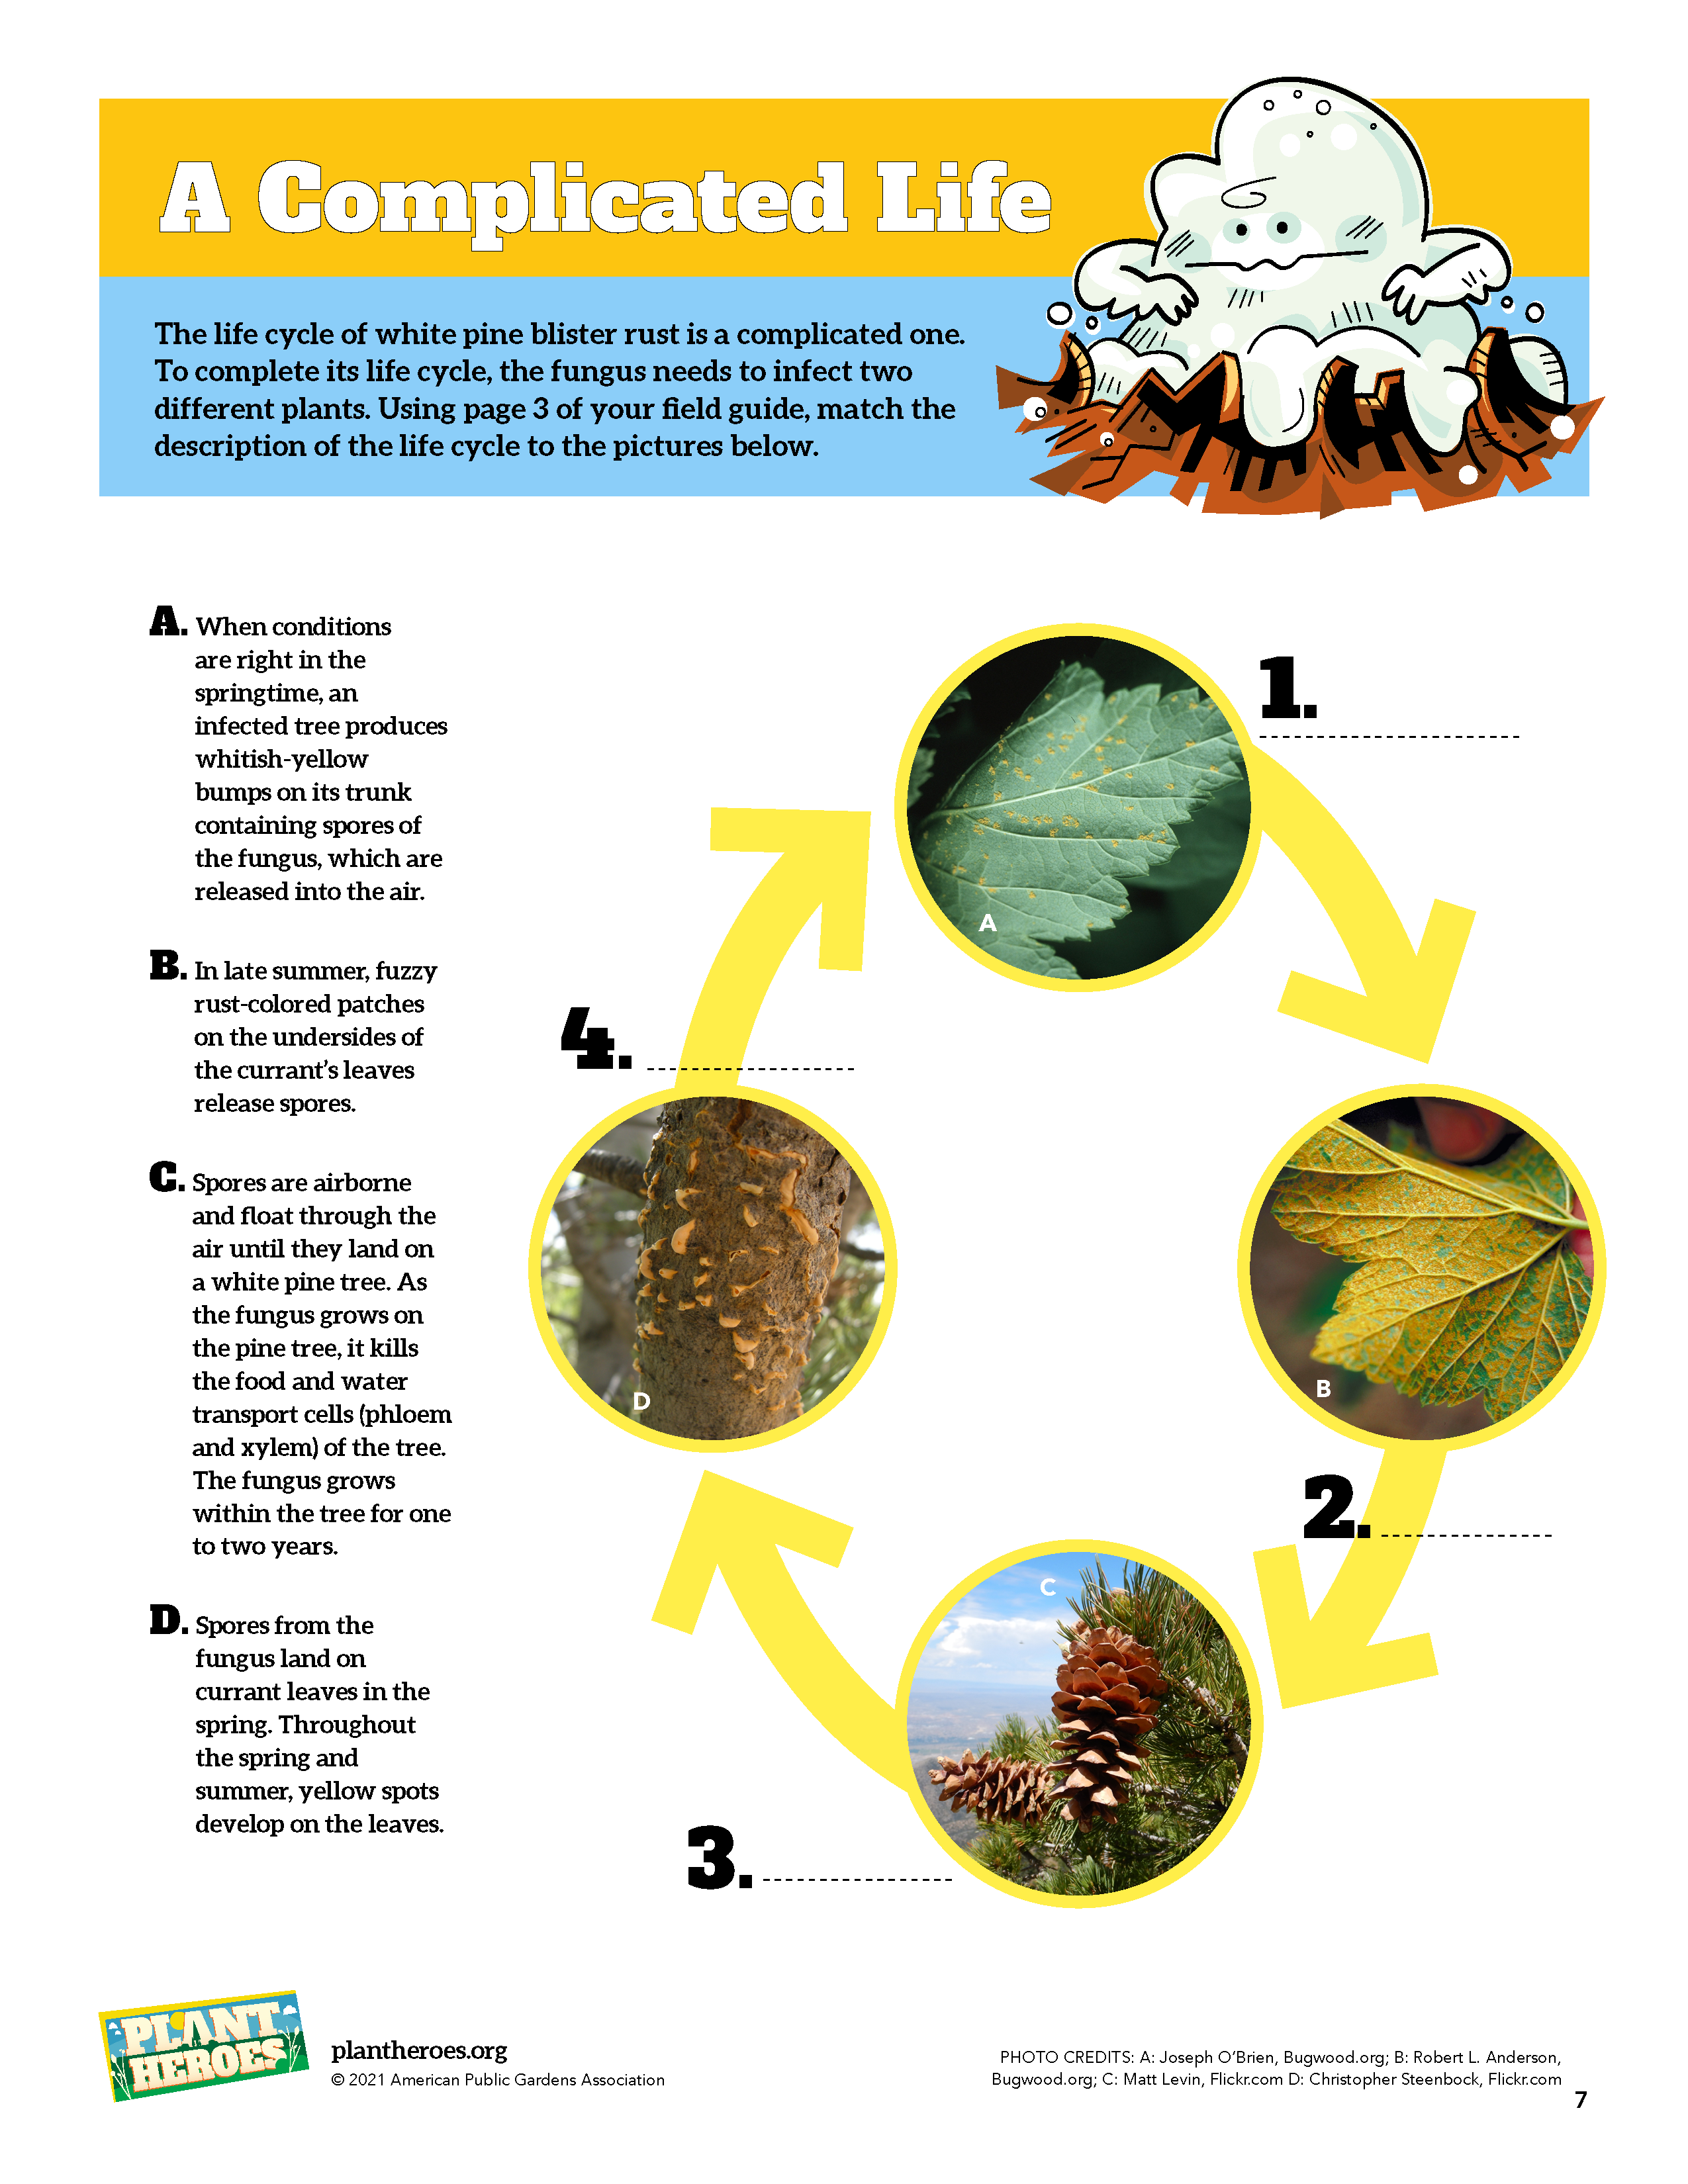 Images of the life cycle of the white pine blister rust